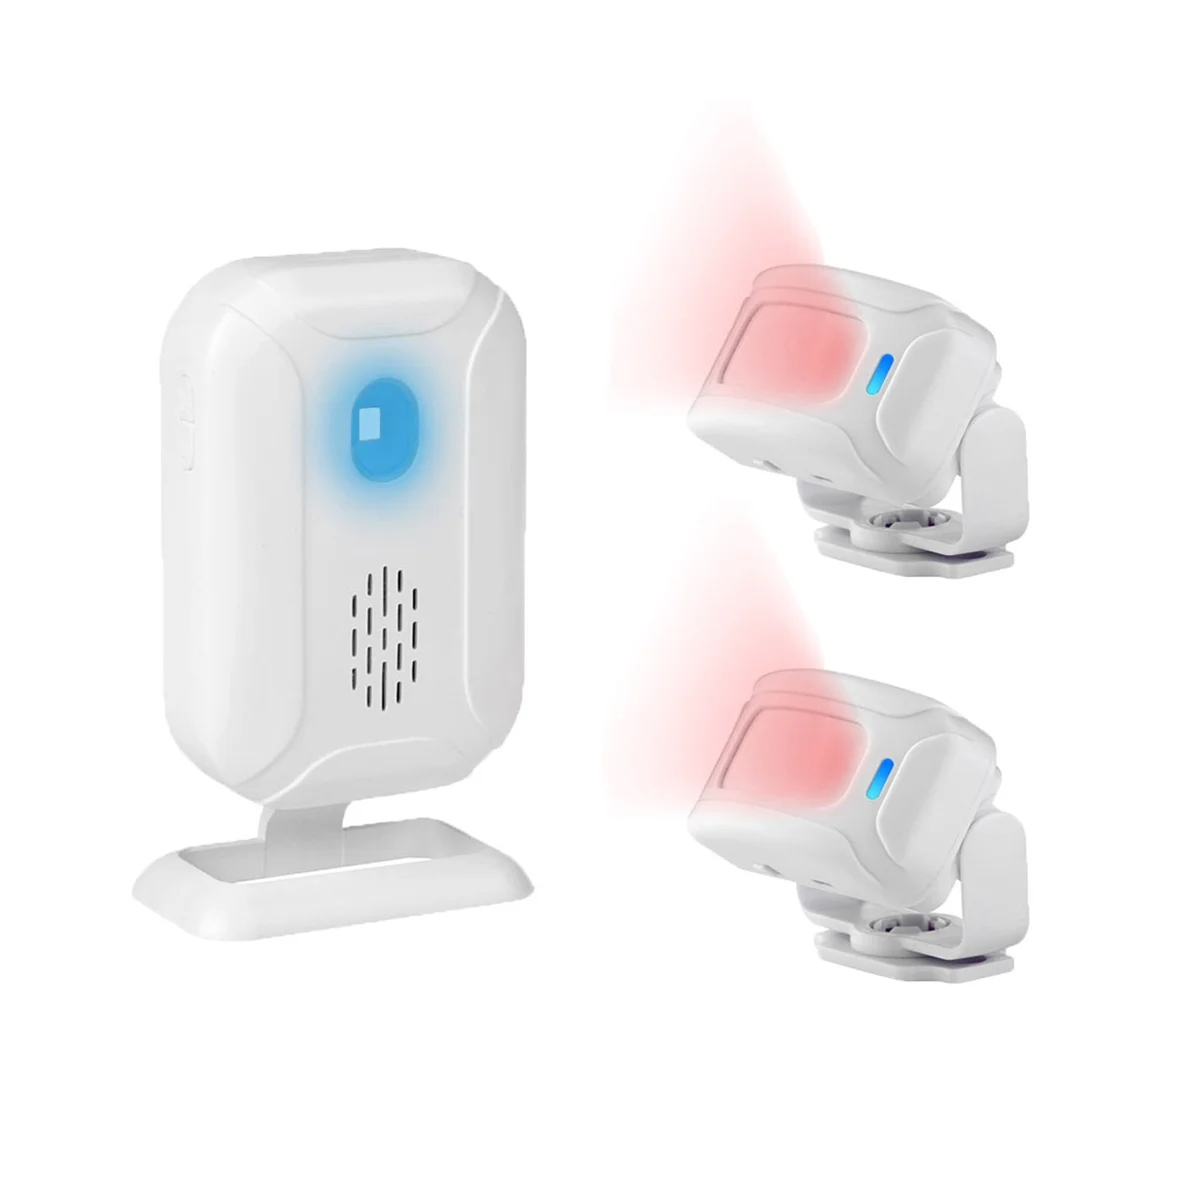 

Wireless Home Security Infrared PIR Motion Sensor Detector Alarm Bell Entry Alert System Shop Store Welcome Chime-A